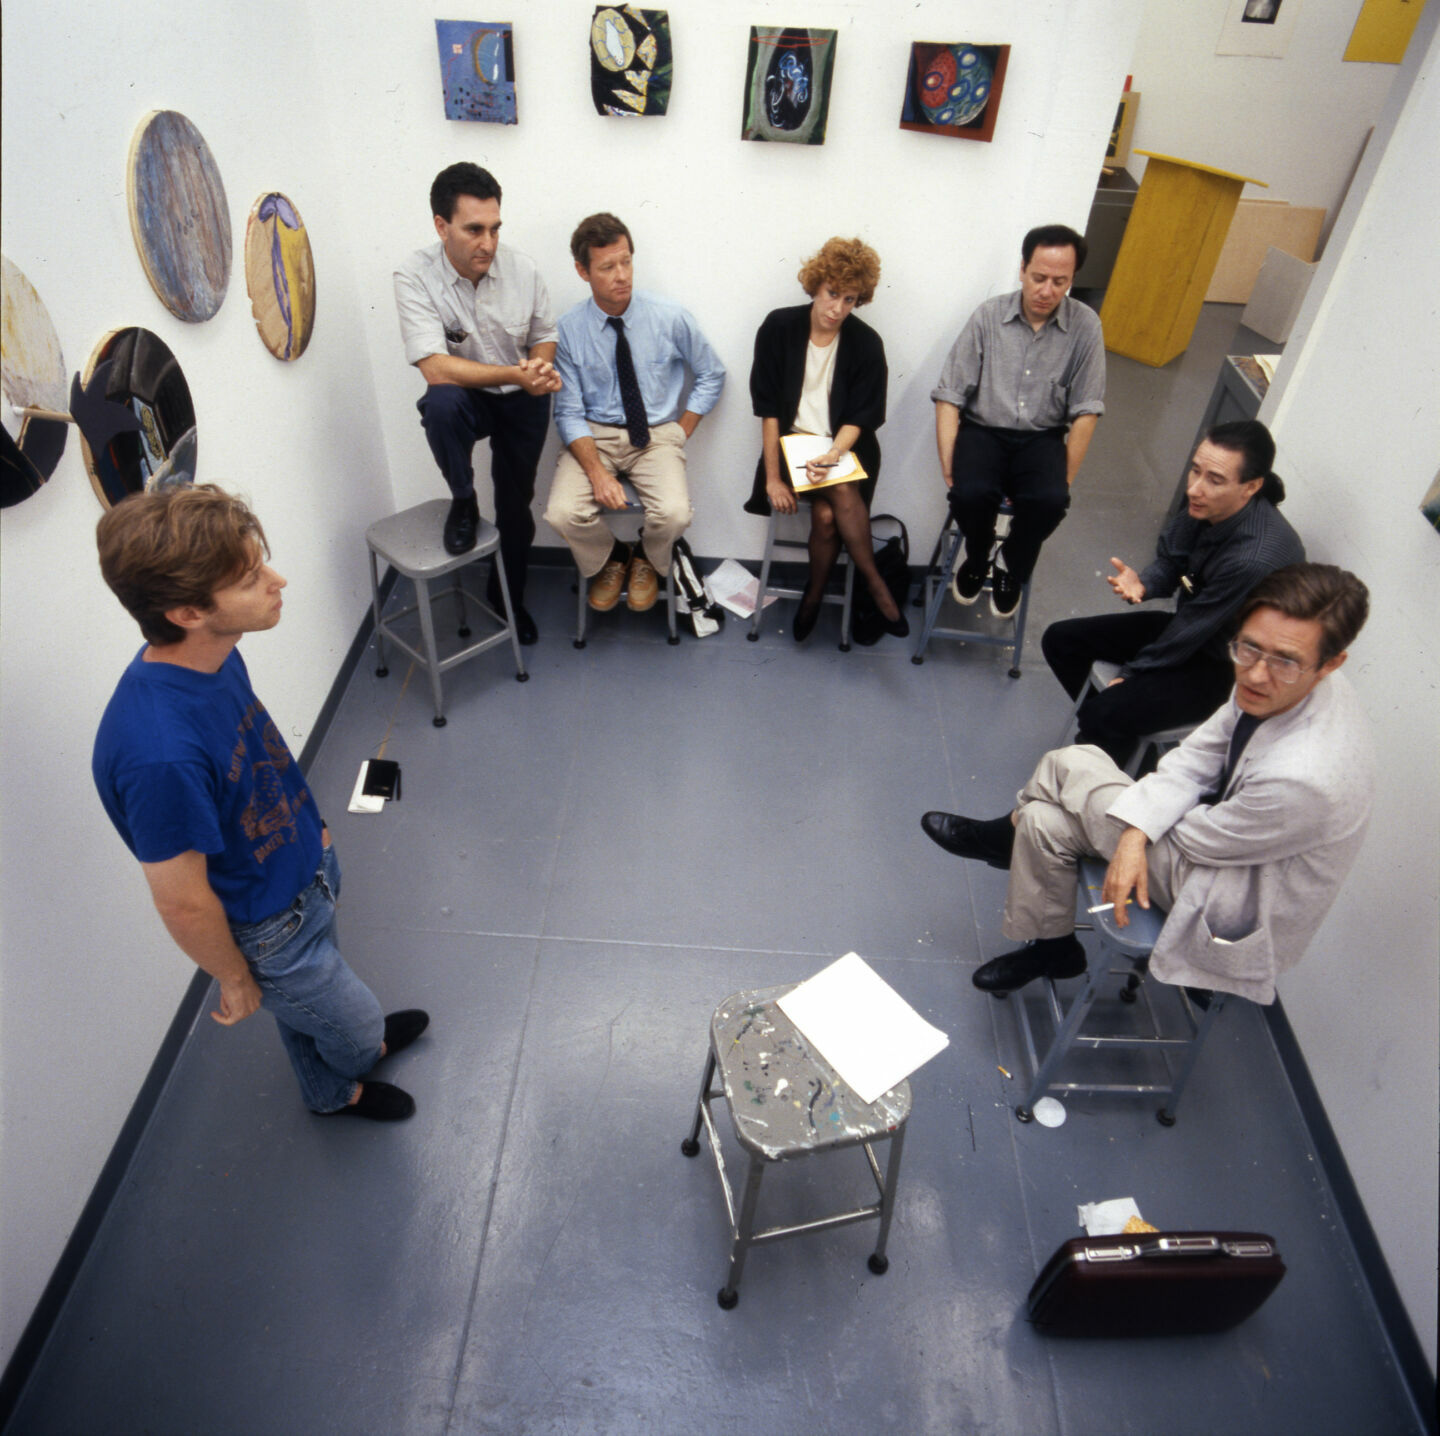 Mike Kelley, pictured at right in black, taught in the Graduate Fine Art department at ArtCenter College of Design from 1986 until 2006.